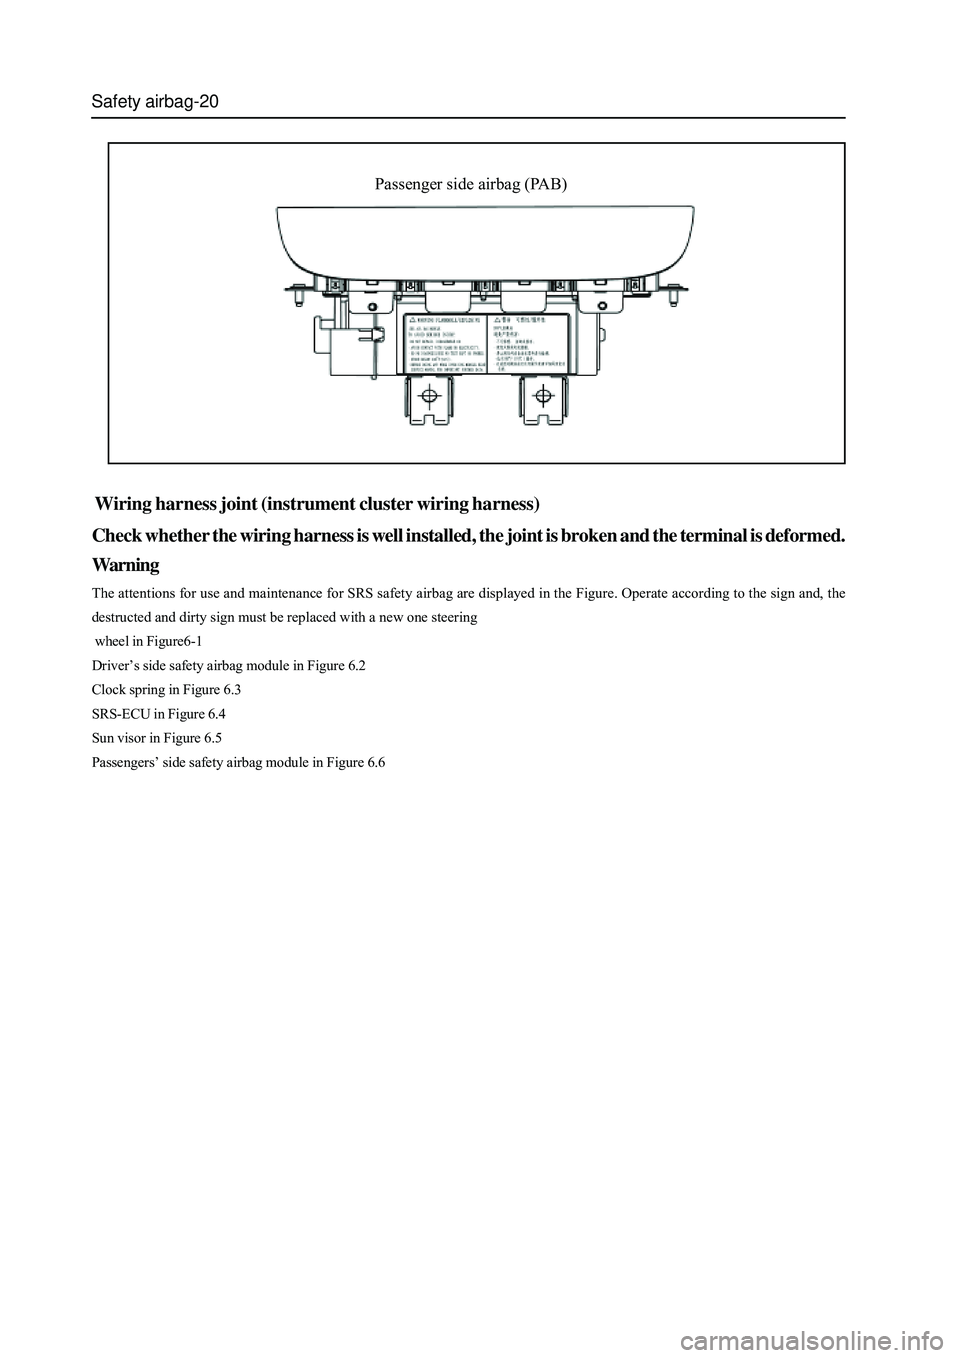 GREAT WALL HOVER 2006  Service Repair Manual Safety airbag-20
 Wiring harness joint (instrument cluster wiring harness)
Check whether the wiring harness is well installed, the joint is broken and the terminal is deformed.
Warning
The attentions 